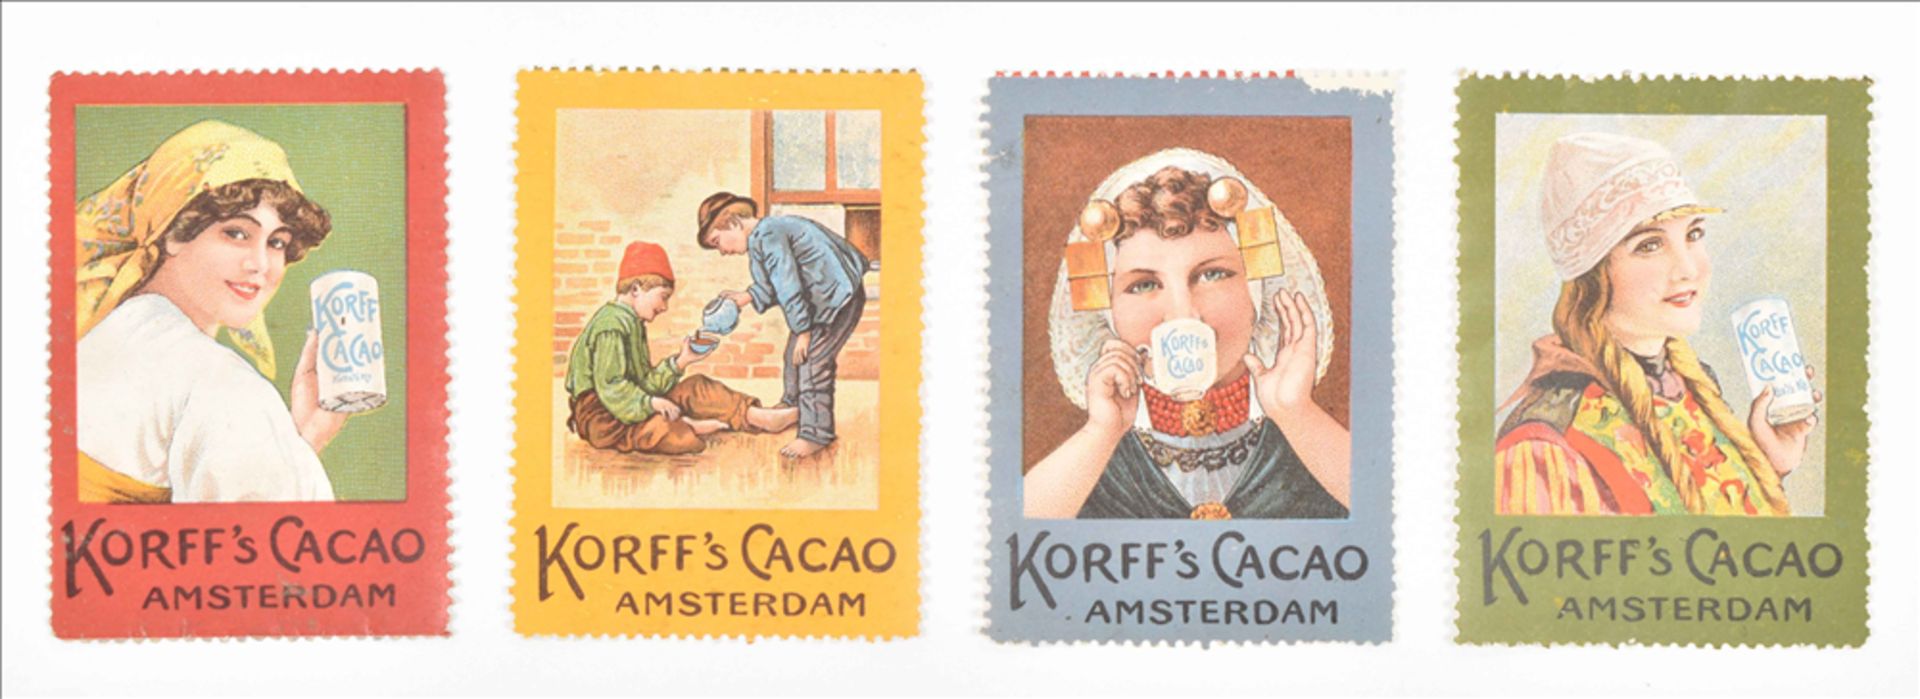 [Poster stamps] Dutch sluitzegels and labels - Image 5 of 10